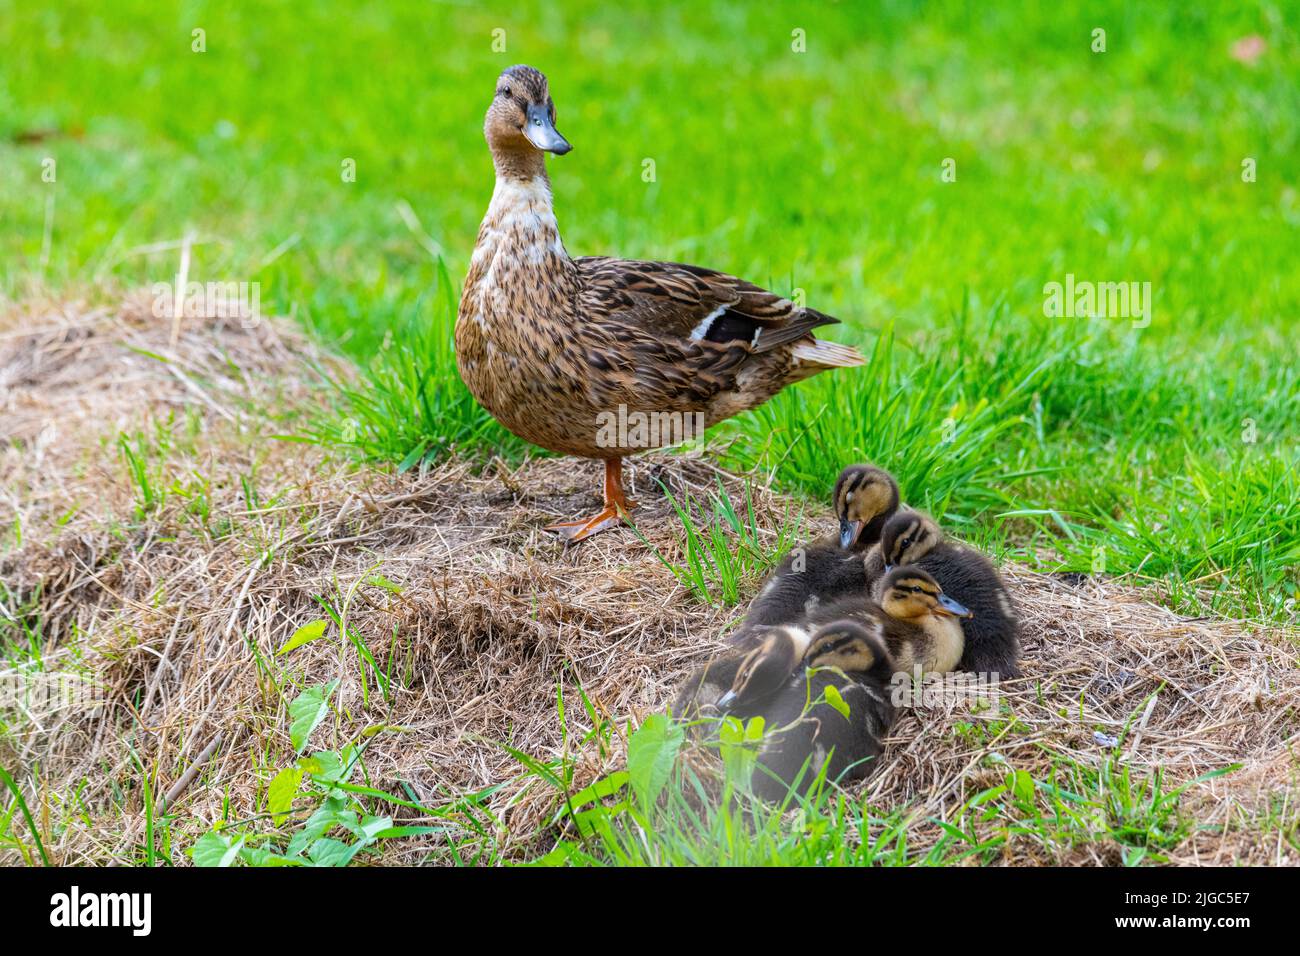 a mother  duck with her ducklings in the great outdoors by a stream Stock Photo